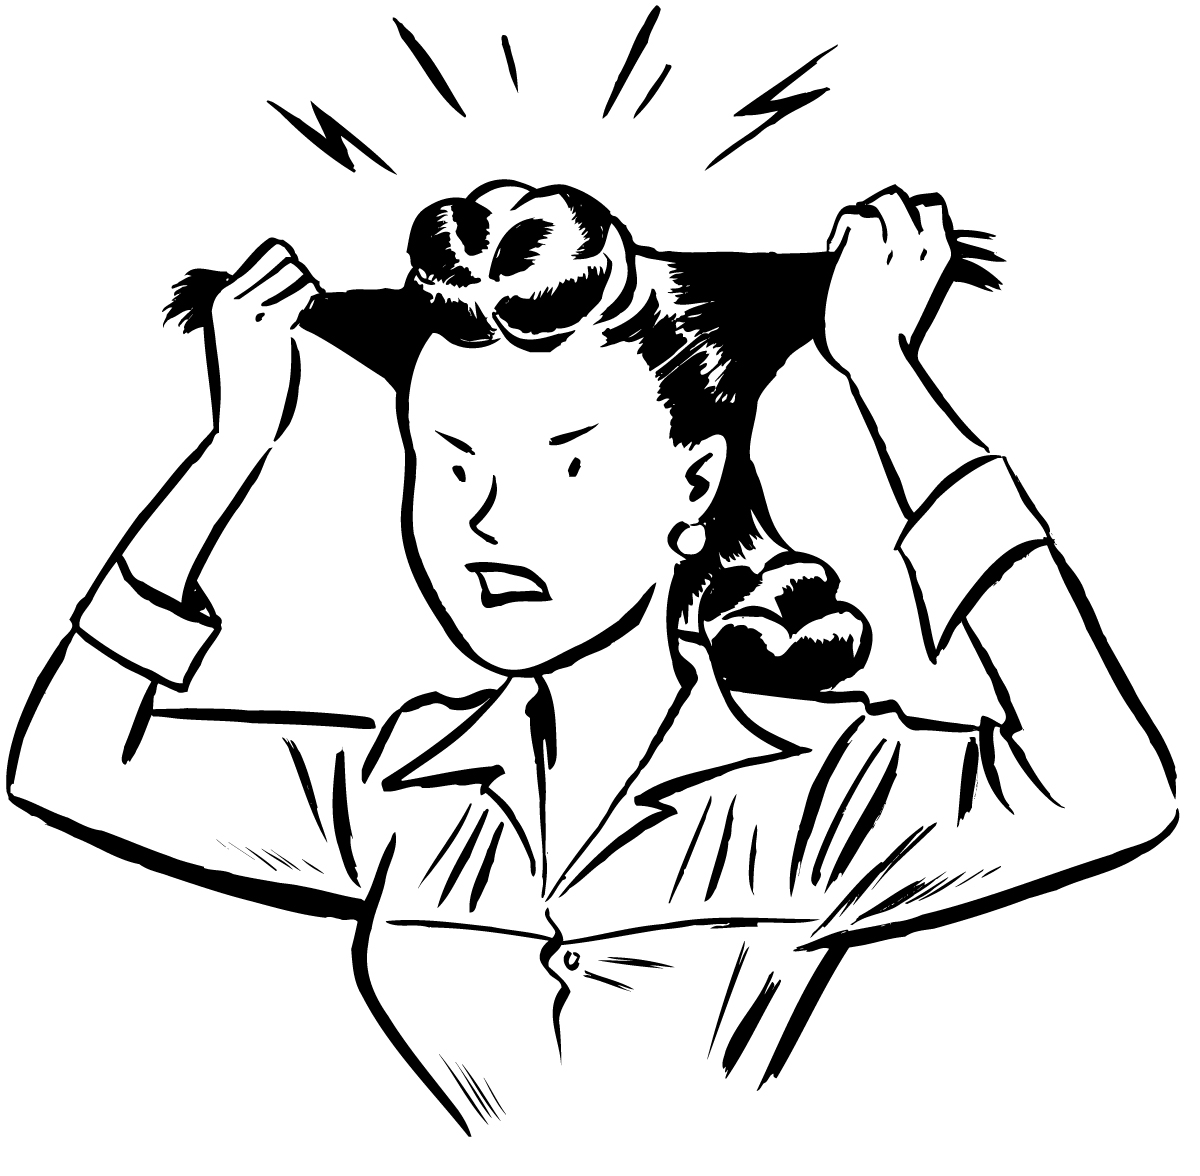 Pics Of Stressed Out People C - Stressed Out Clipart